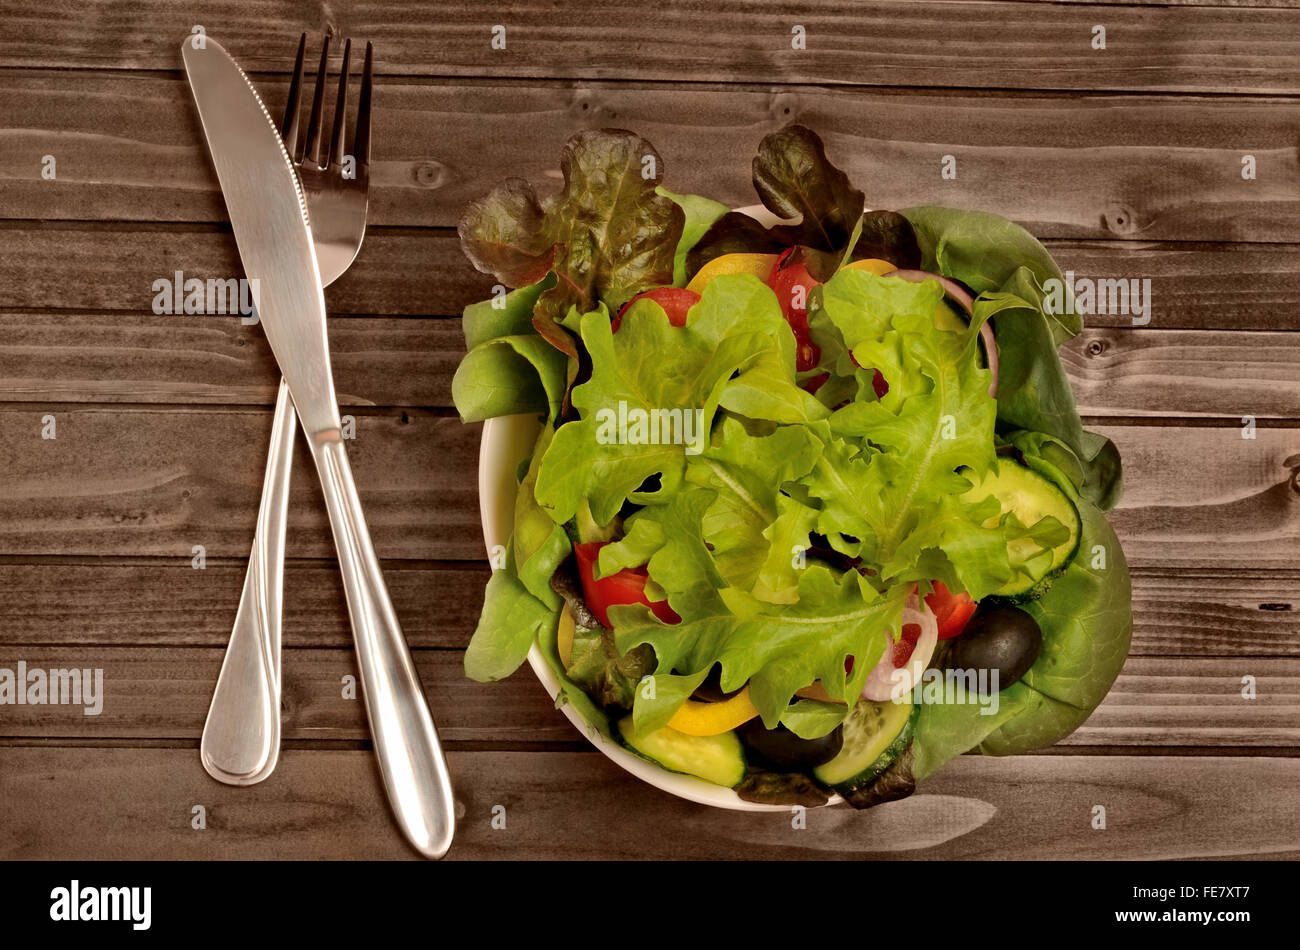 Bowl with vegetabe salad on table Stock Photo